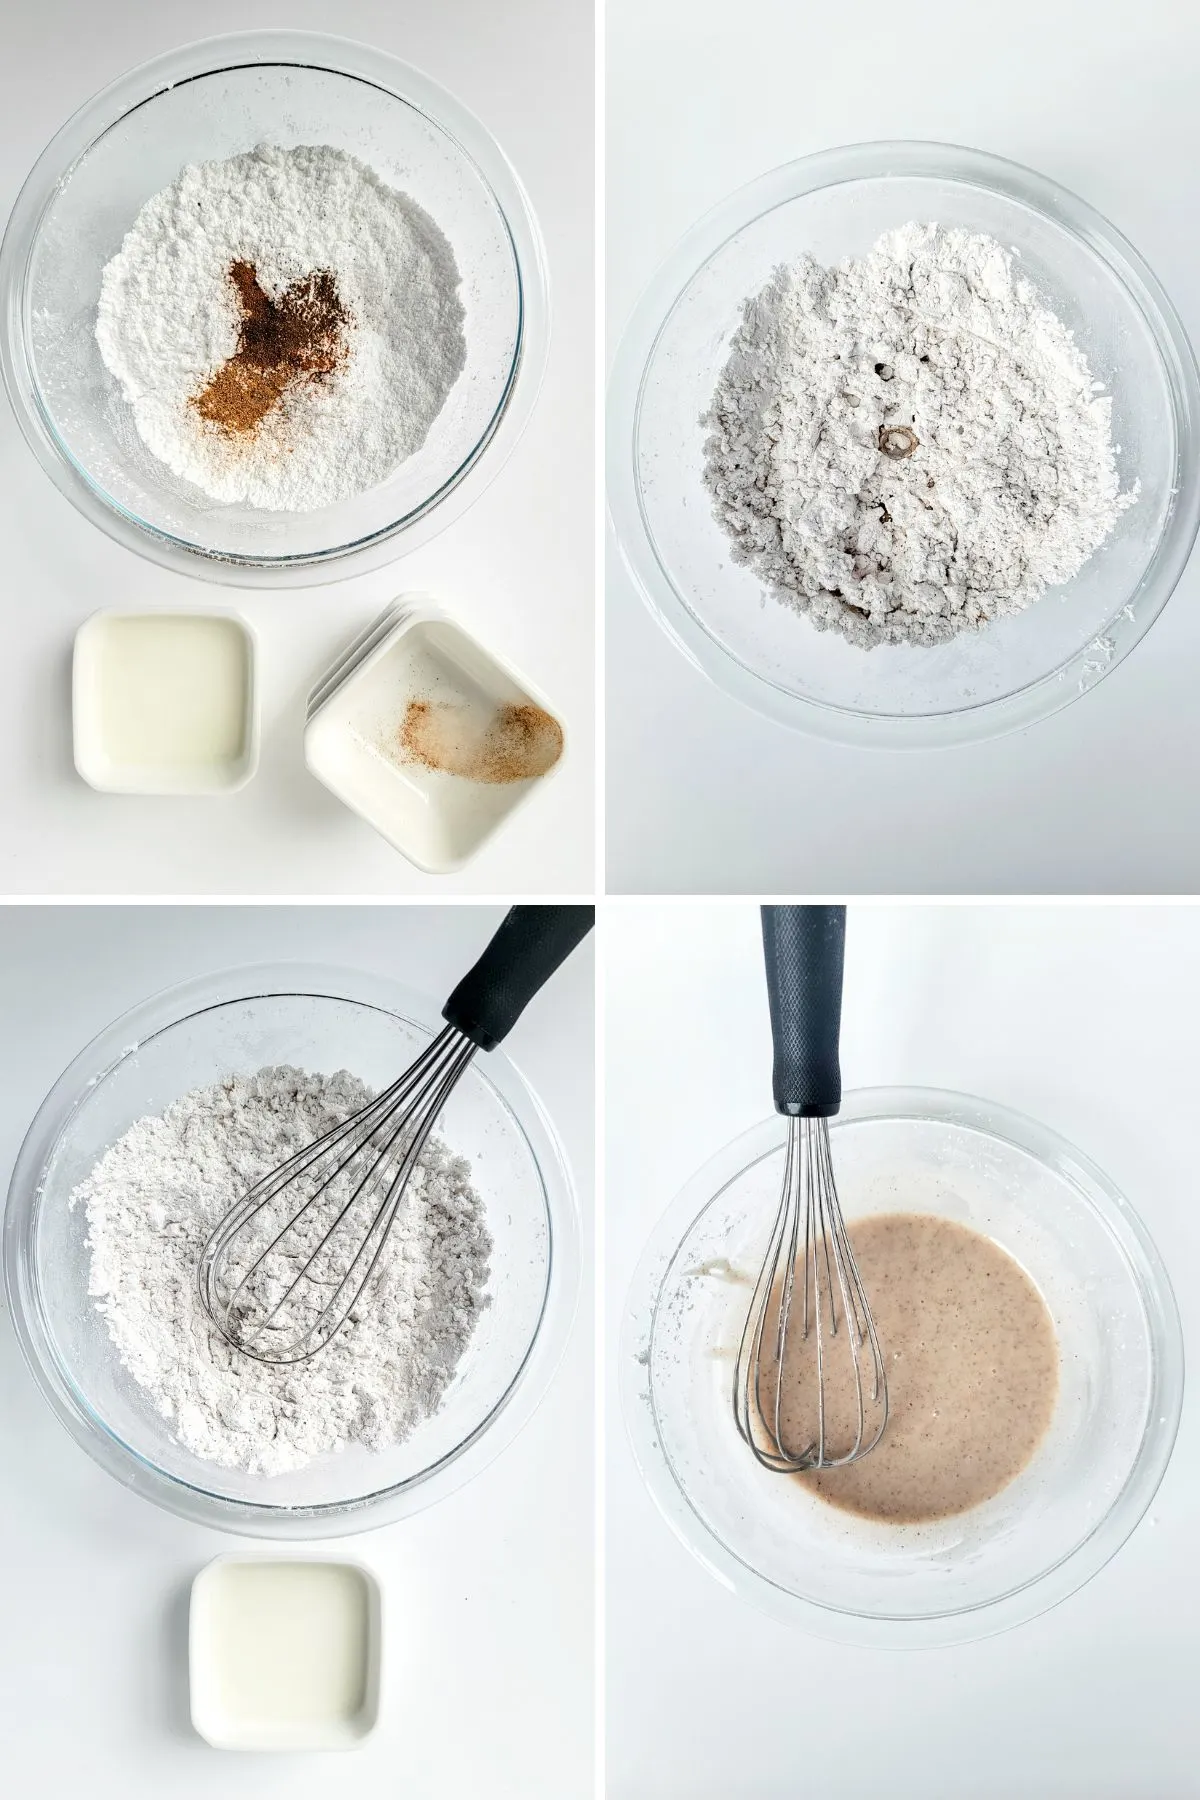 Collages of images showing how to make cinnamon sugar glaze.